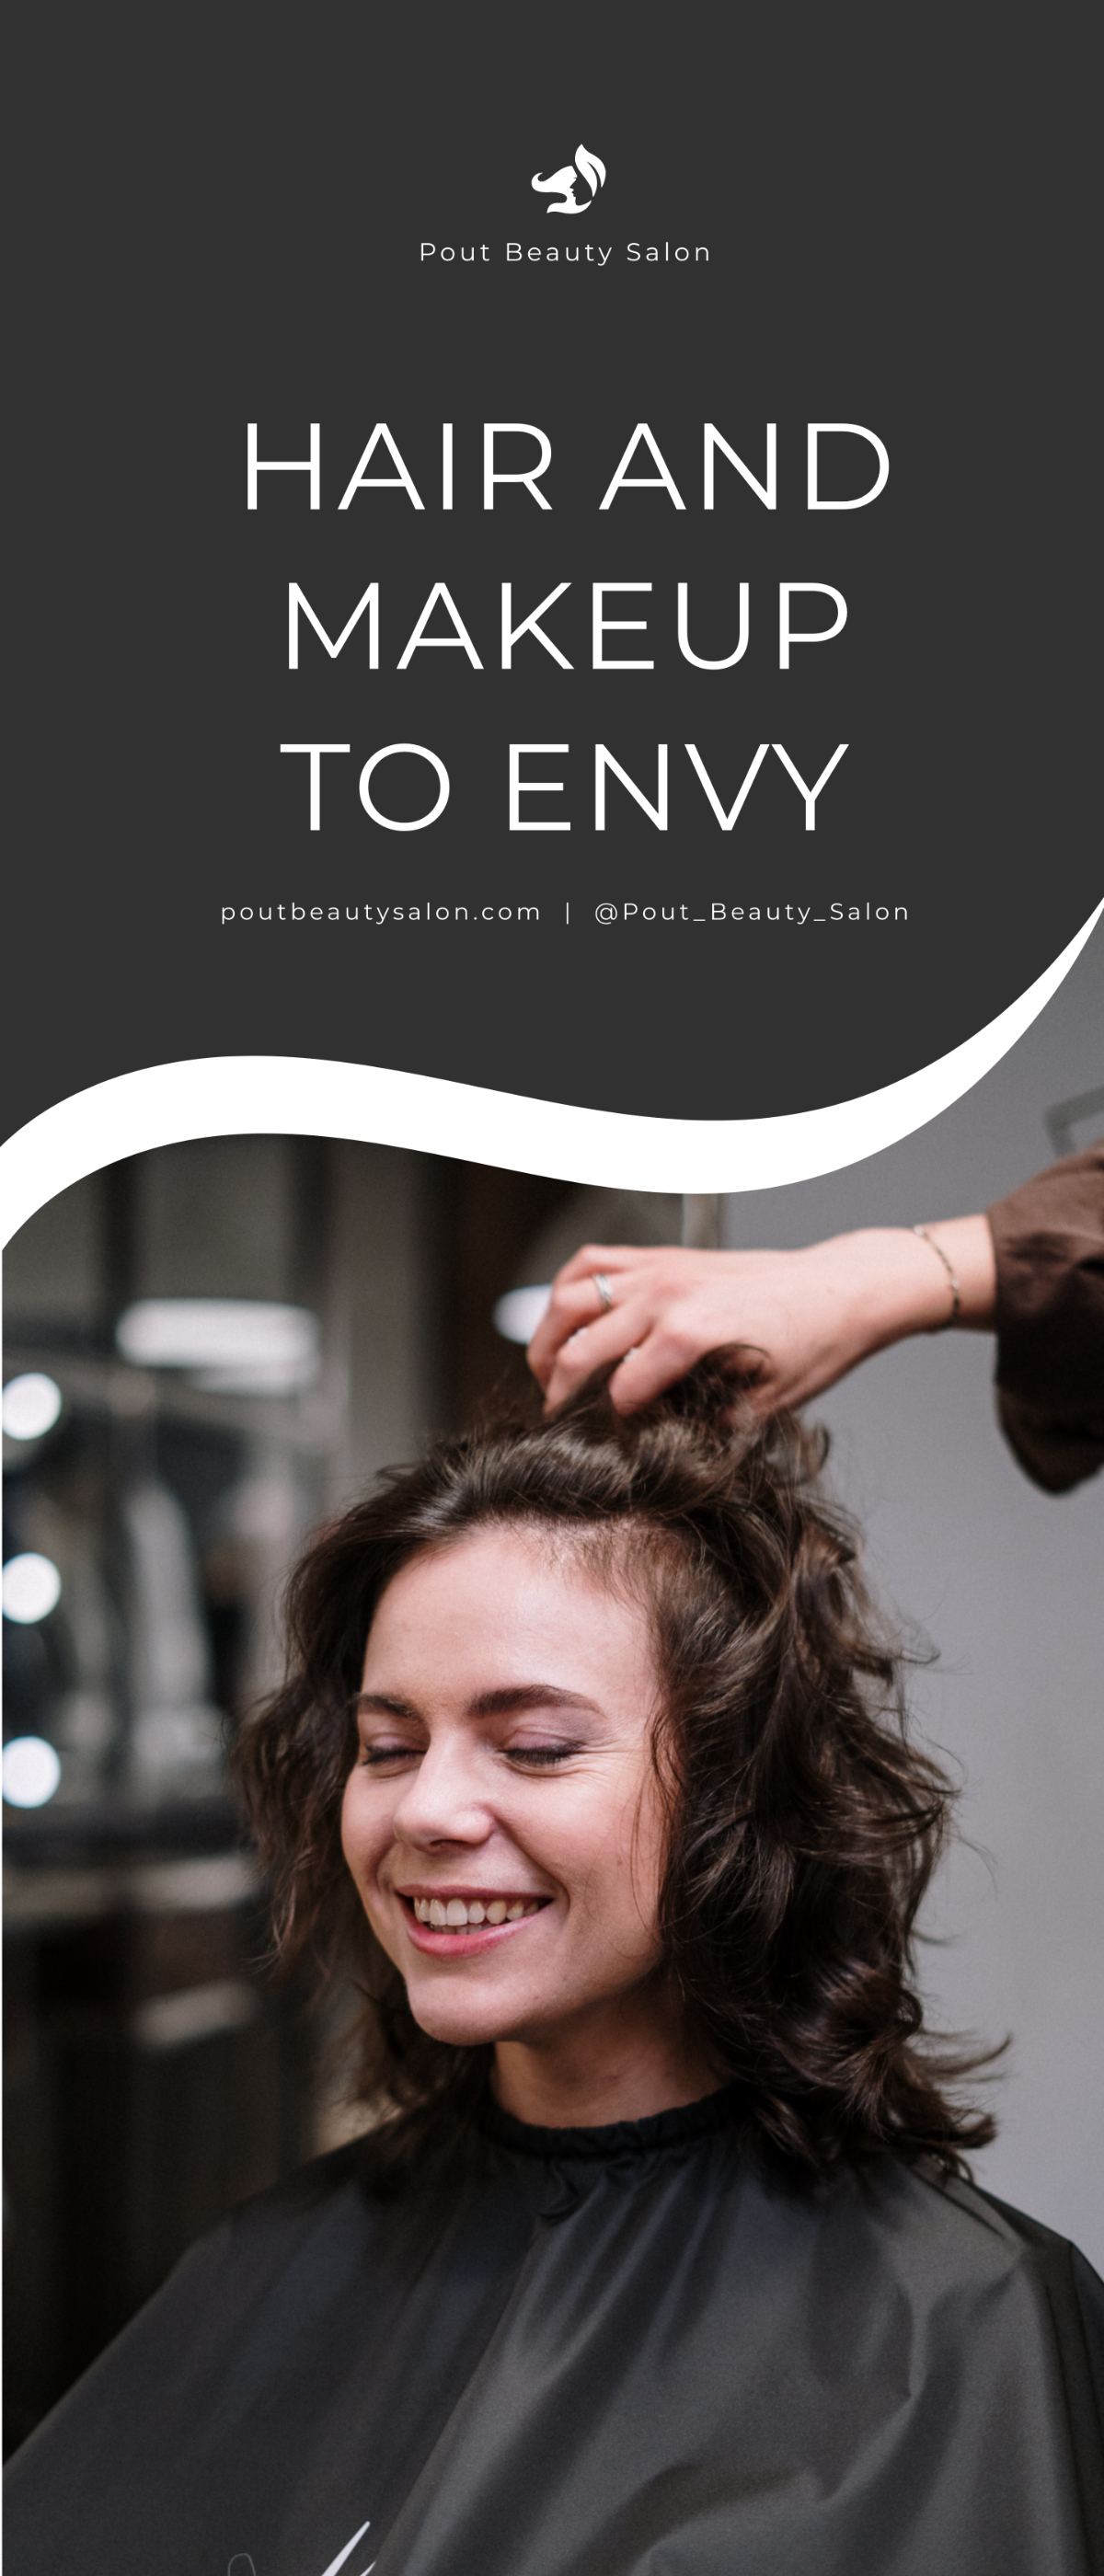 Free Salon Roll Up Banner Template